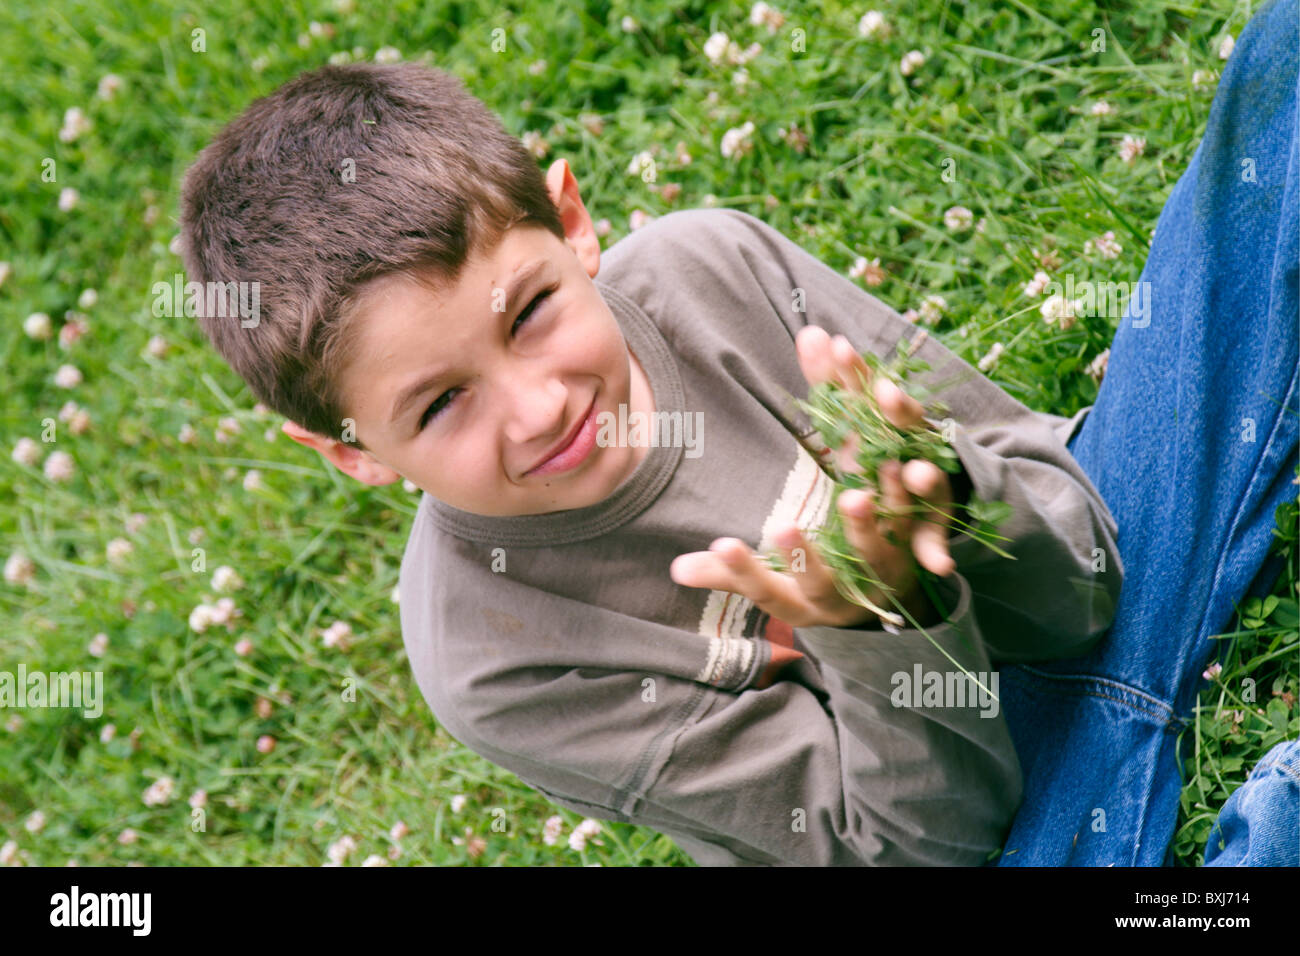 Young boy picking handfuls of grass, France. Stock Photo